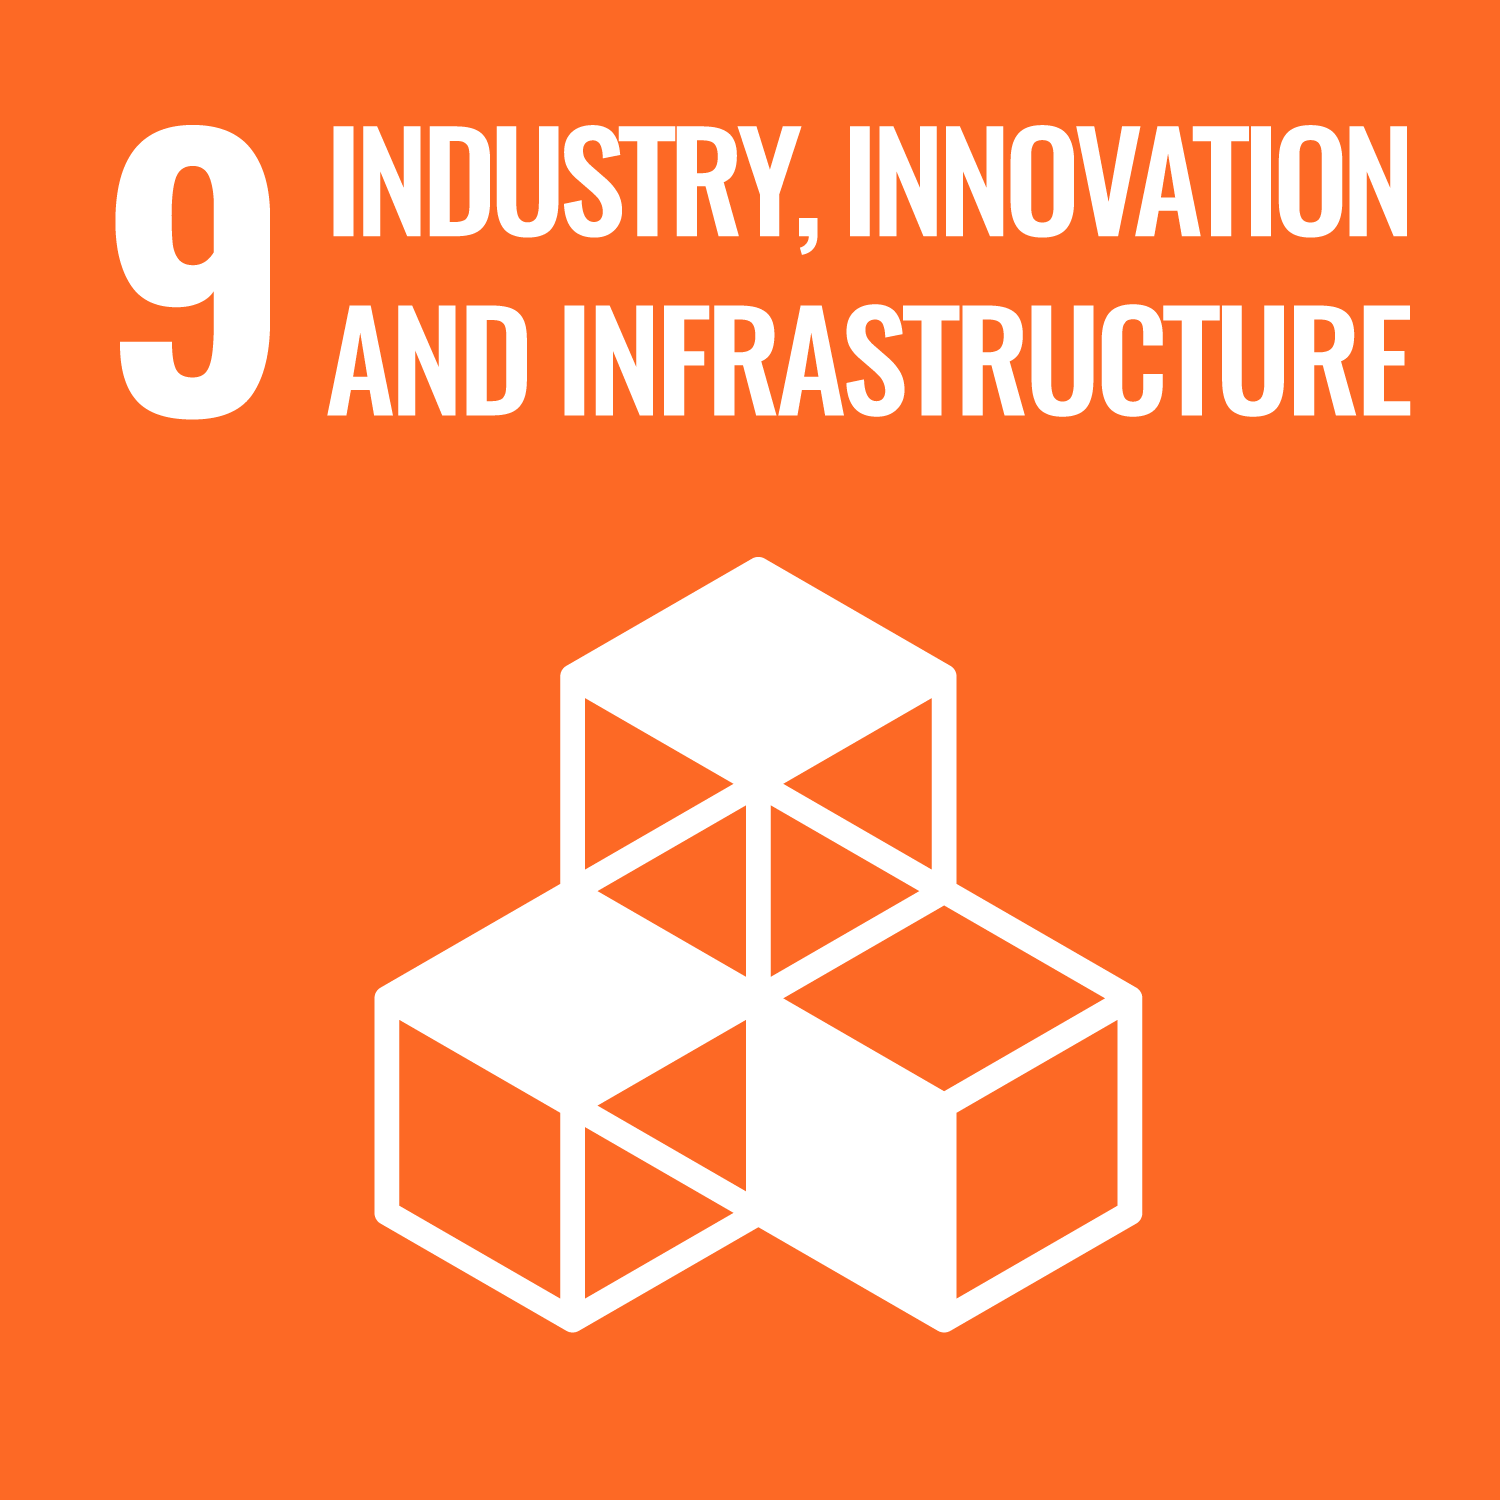 ODS 9: Industry, Innovation and Infrastructure